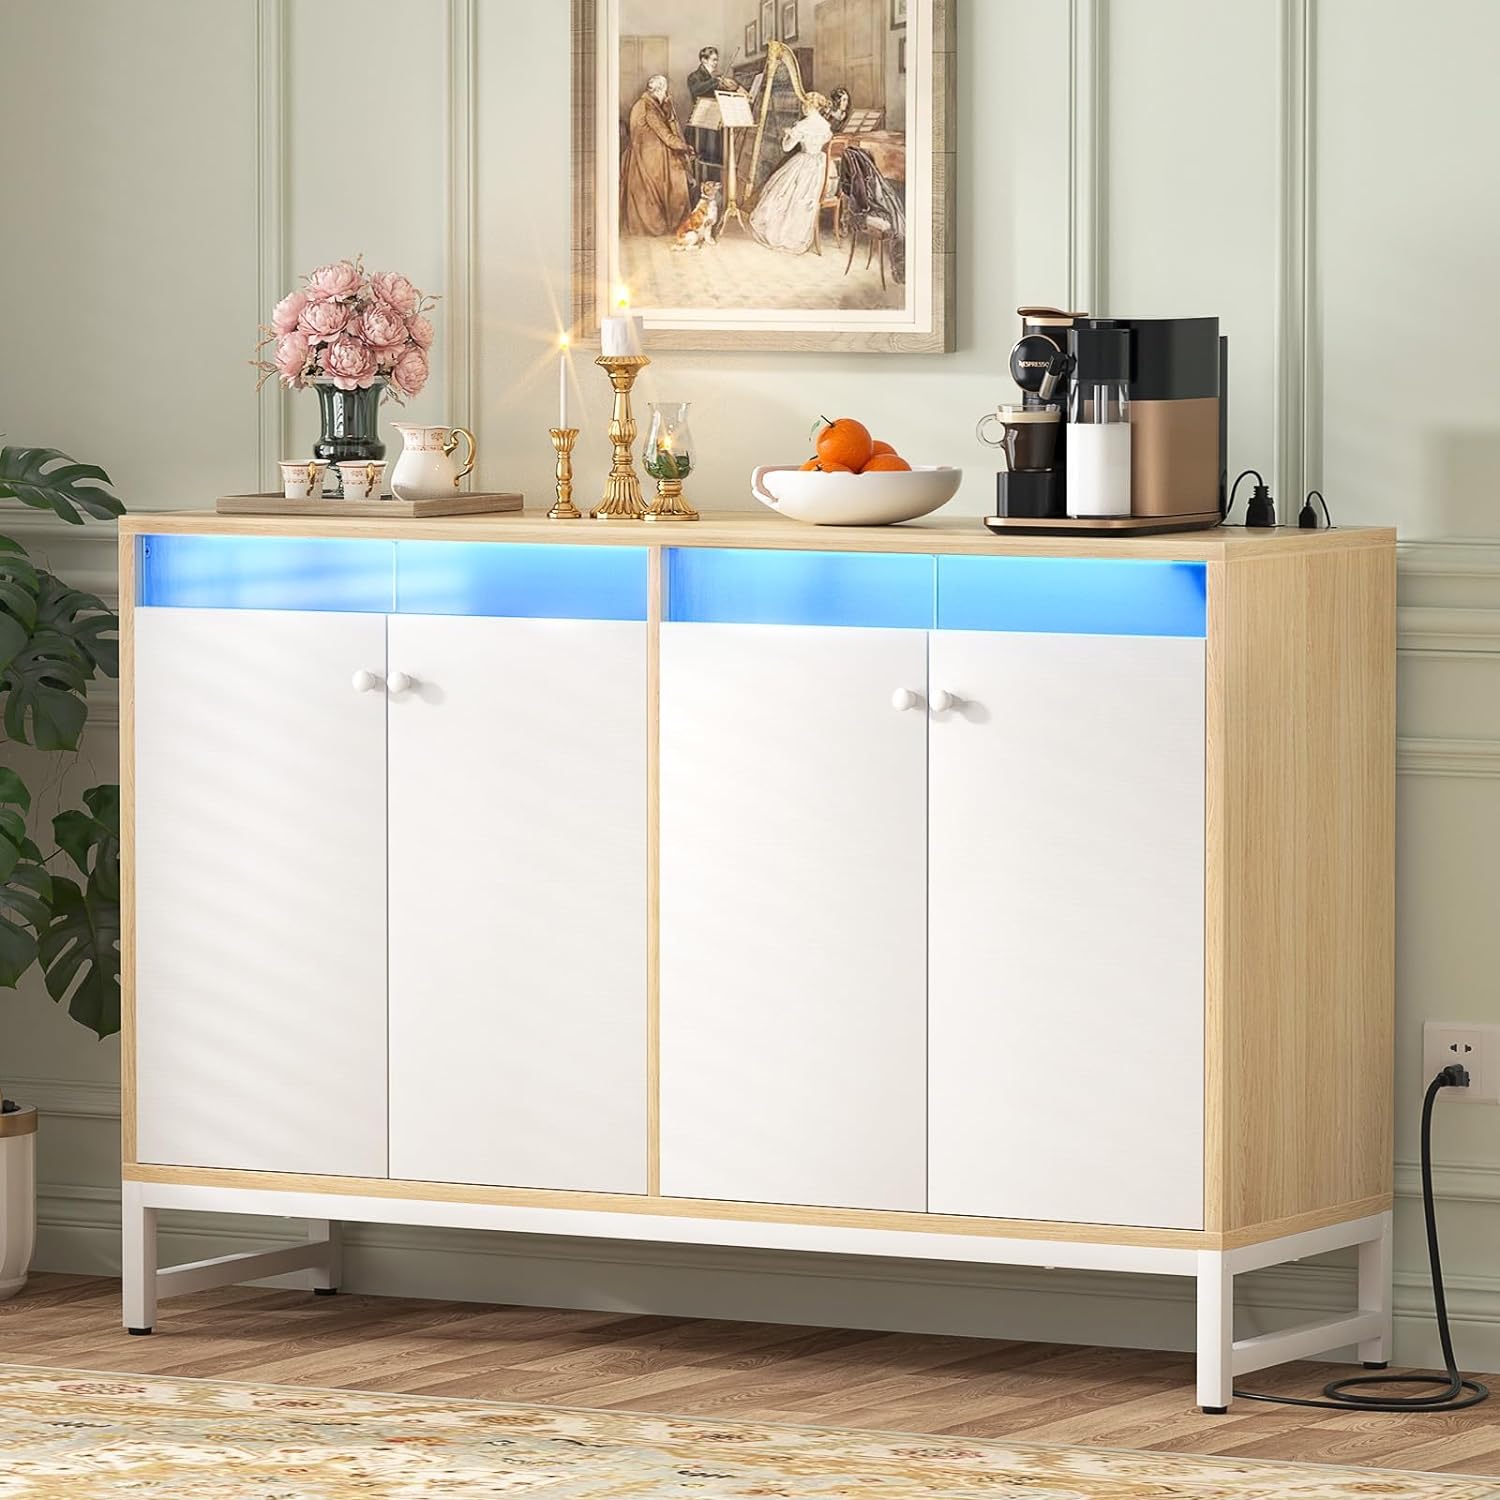 Aheaplus Sideboard Buffet Cabinet with Power Outlet, Kitchen Storage Cabinet with LED Light & Acrylic Doors, Accent Cabinet Cupboard Console Table for Dining Room, Kitchen, Hallway, Natural